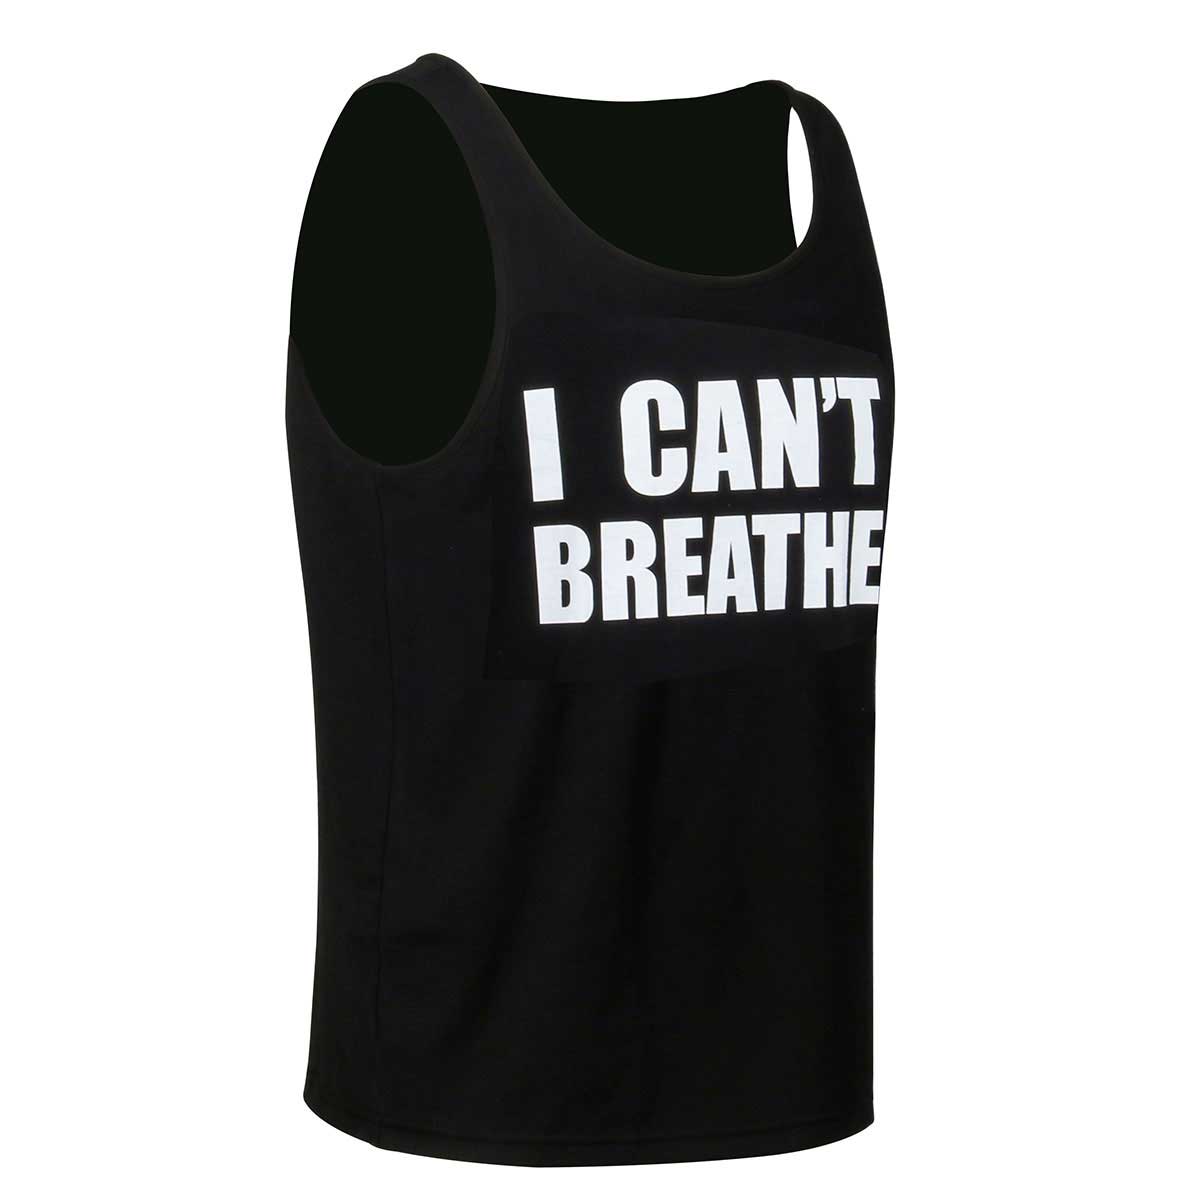 I Can't Breathe Sleeveless Shirt Protest Tank Top